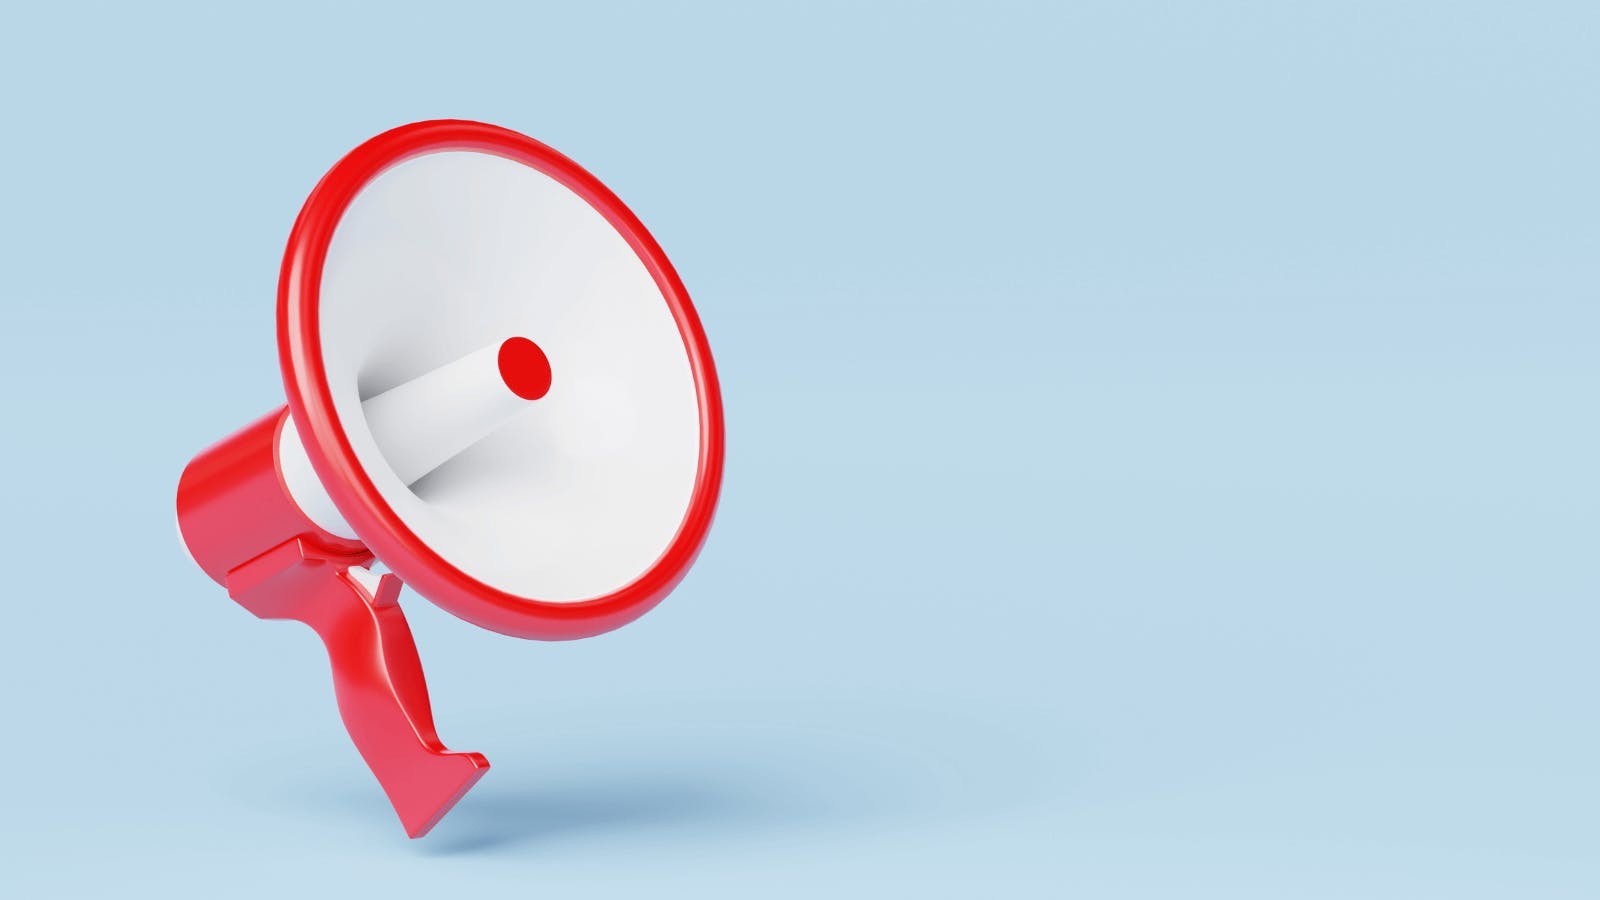 Image of a red megaphone placed on a blue background